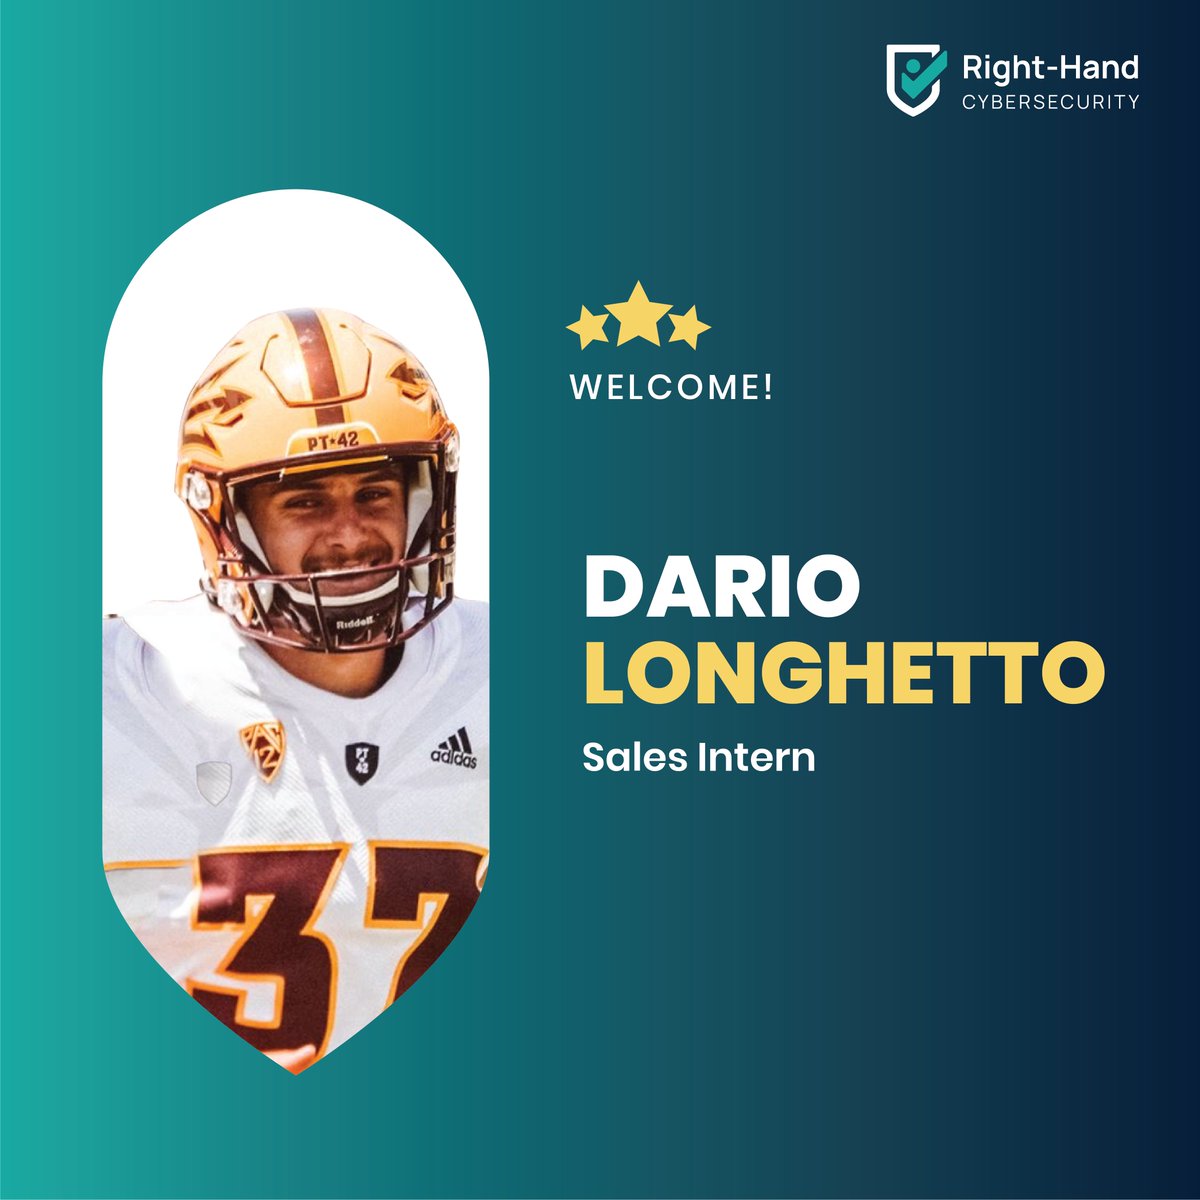 We're excited to welcome @DarioLonghetto, our new sales intern, @asu student, and Arizona State Sun Devils star kicker!

His recent 53-yard kick last weekend highlights his determination and ability under pressure. 

#HumanRiskManagement #SalesSkills #SecurityAwareness